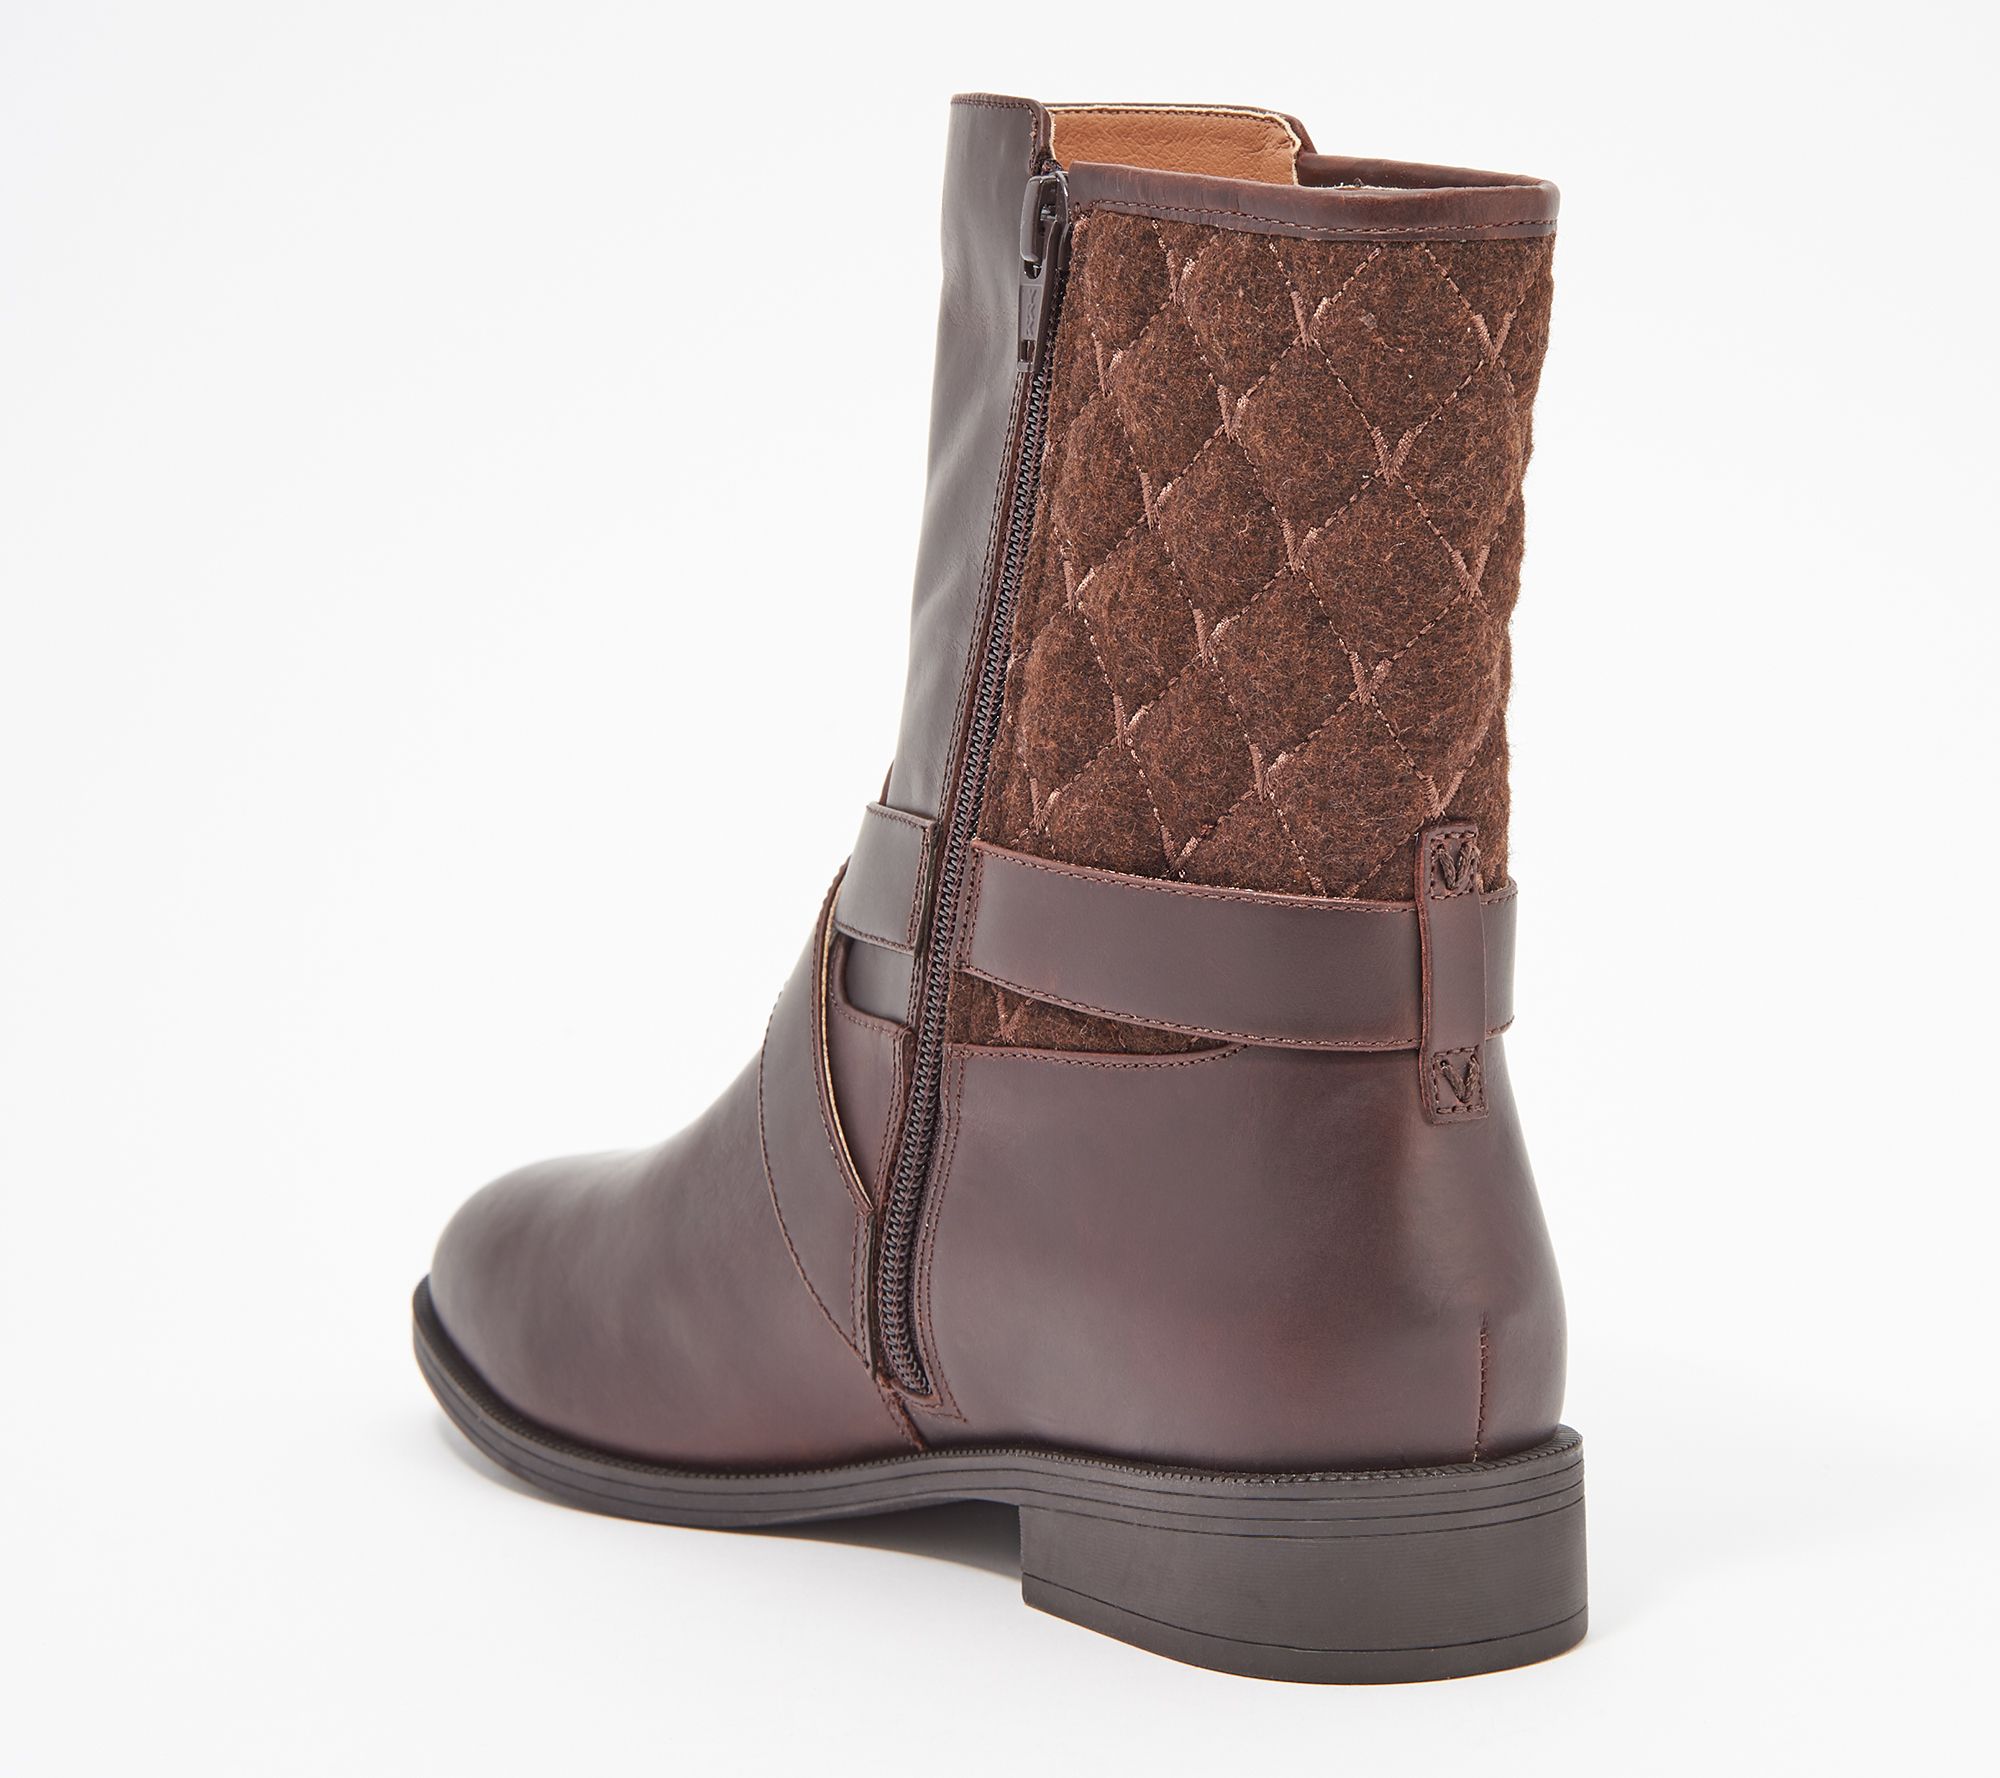 Vionic Quilted Leather Mid Boots - Thea - QVC.com